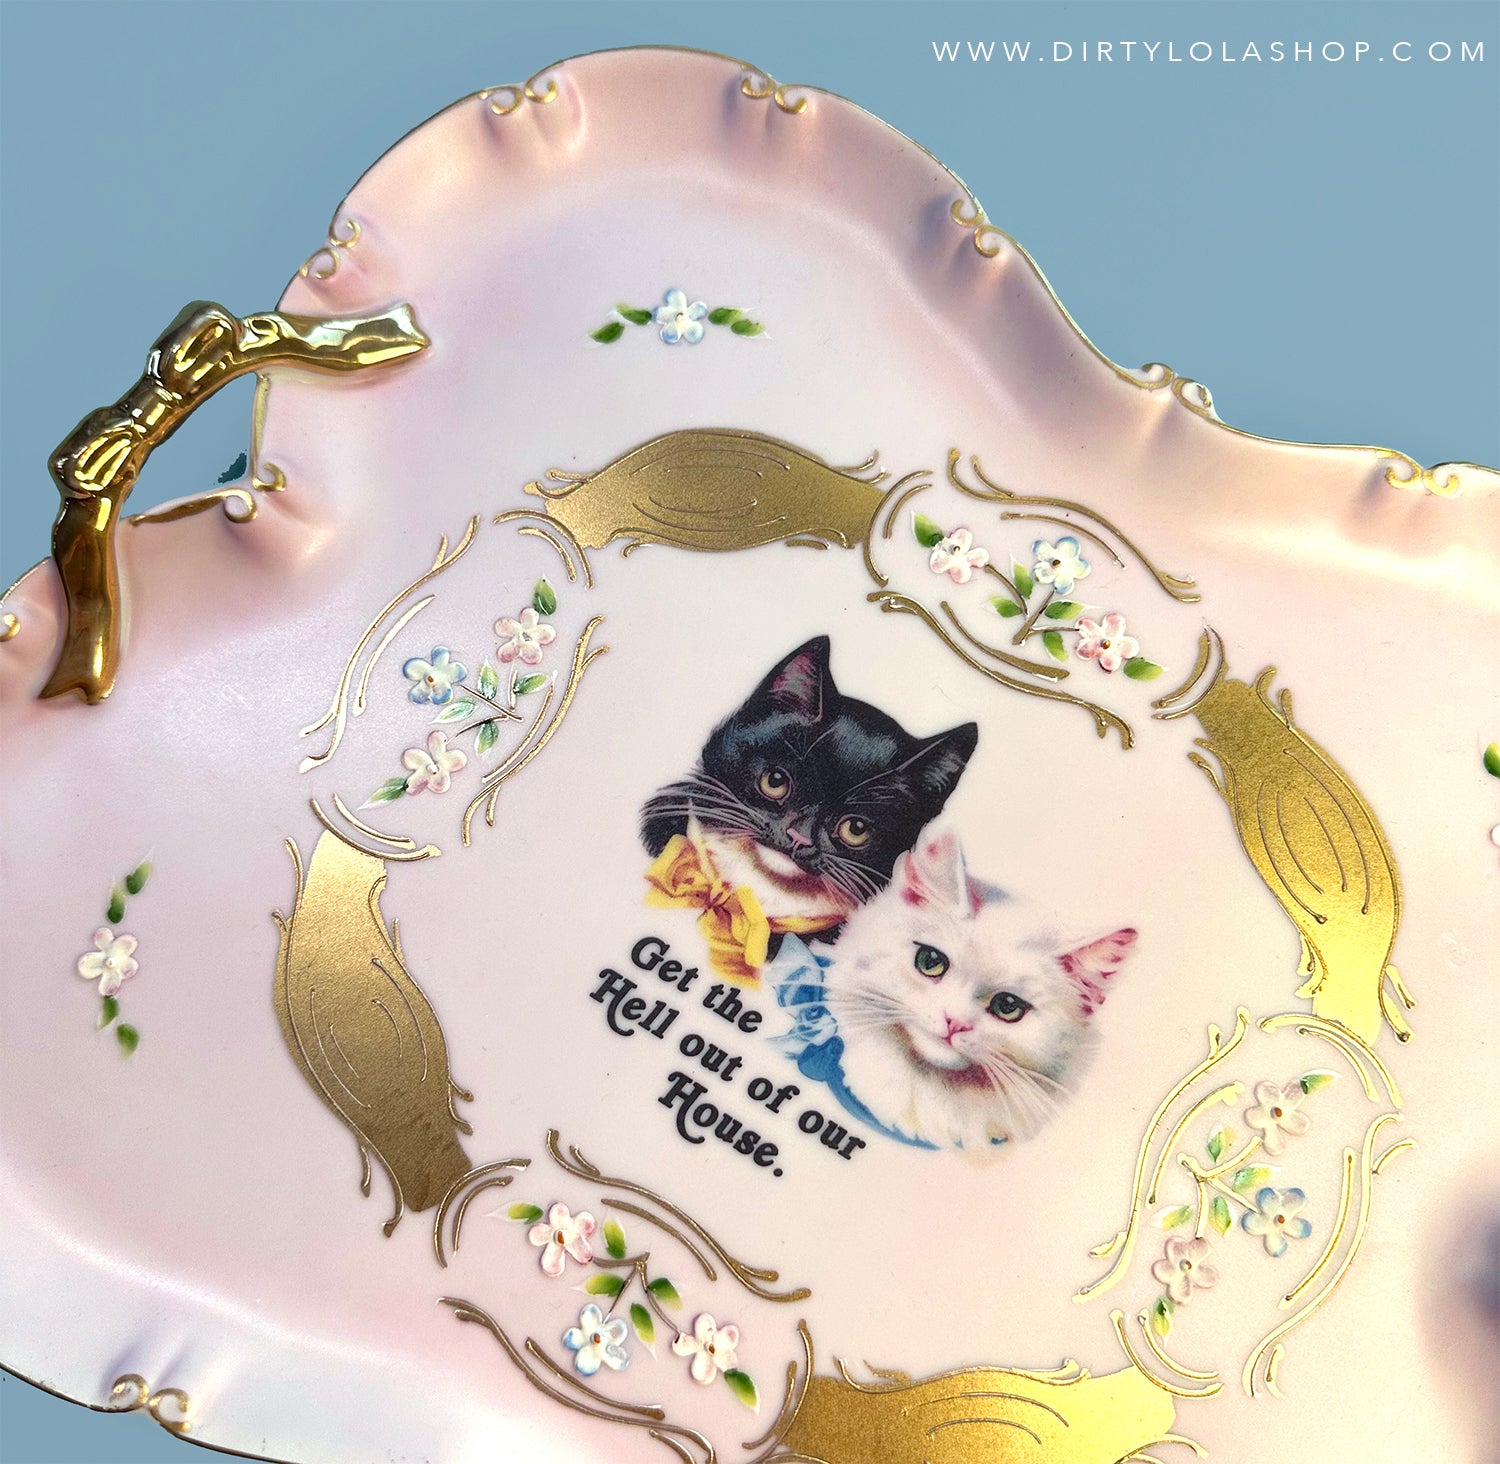 Antique Art Platter - Cat Vanity Tray - Dresser Tray -  "Get the Hell Out of Our House"